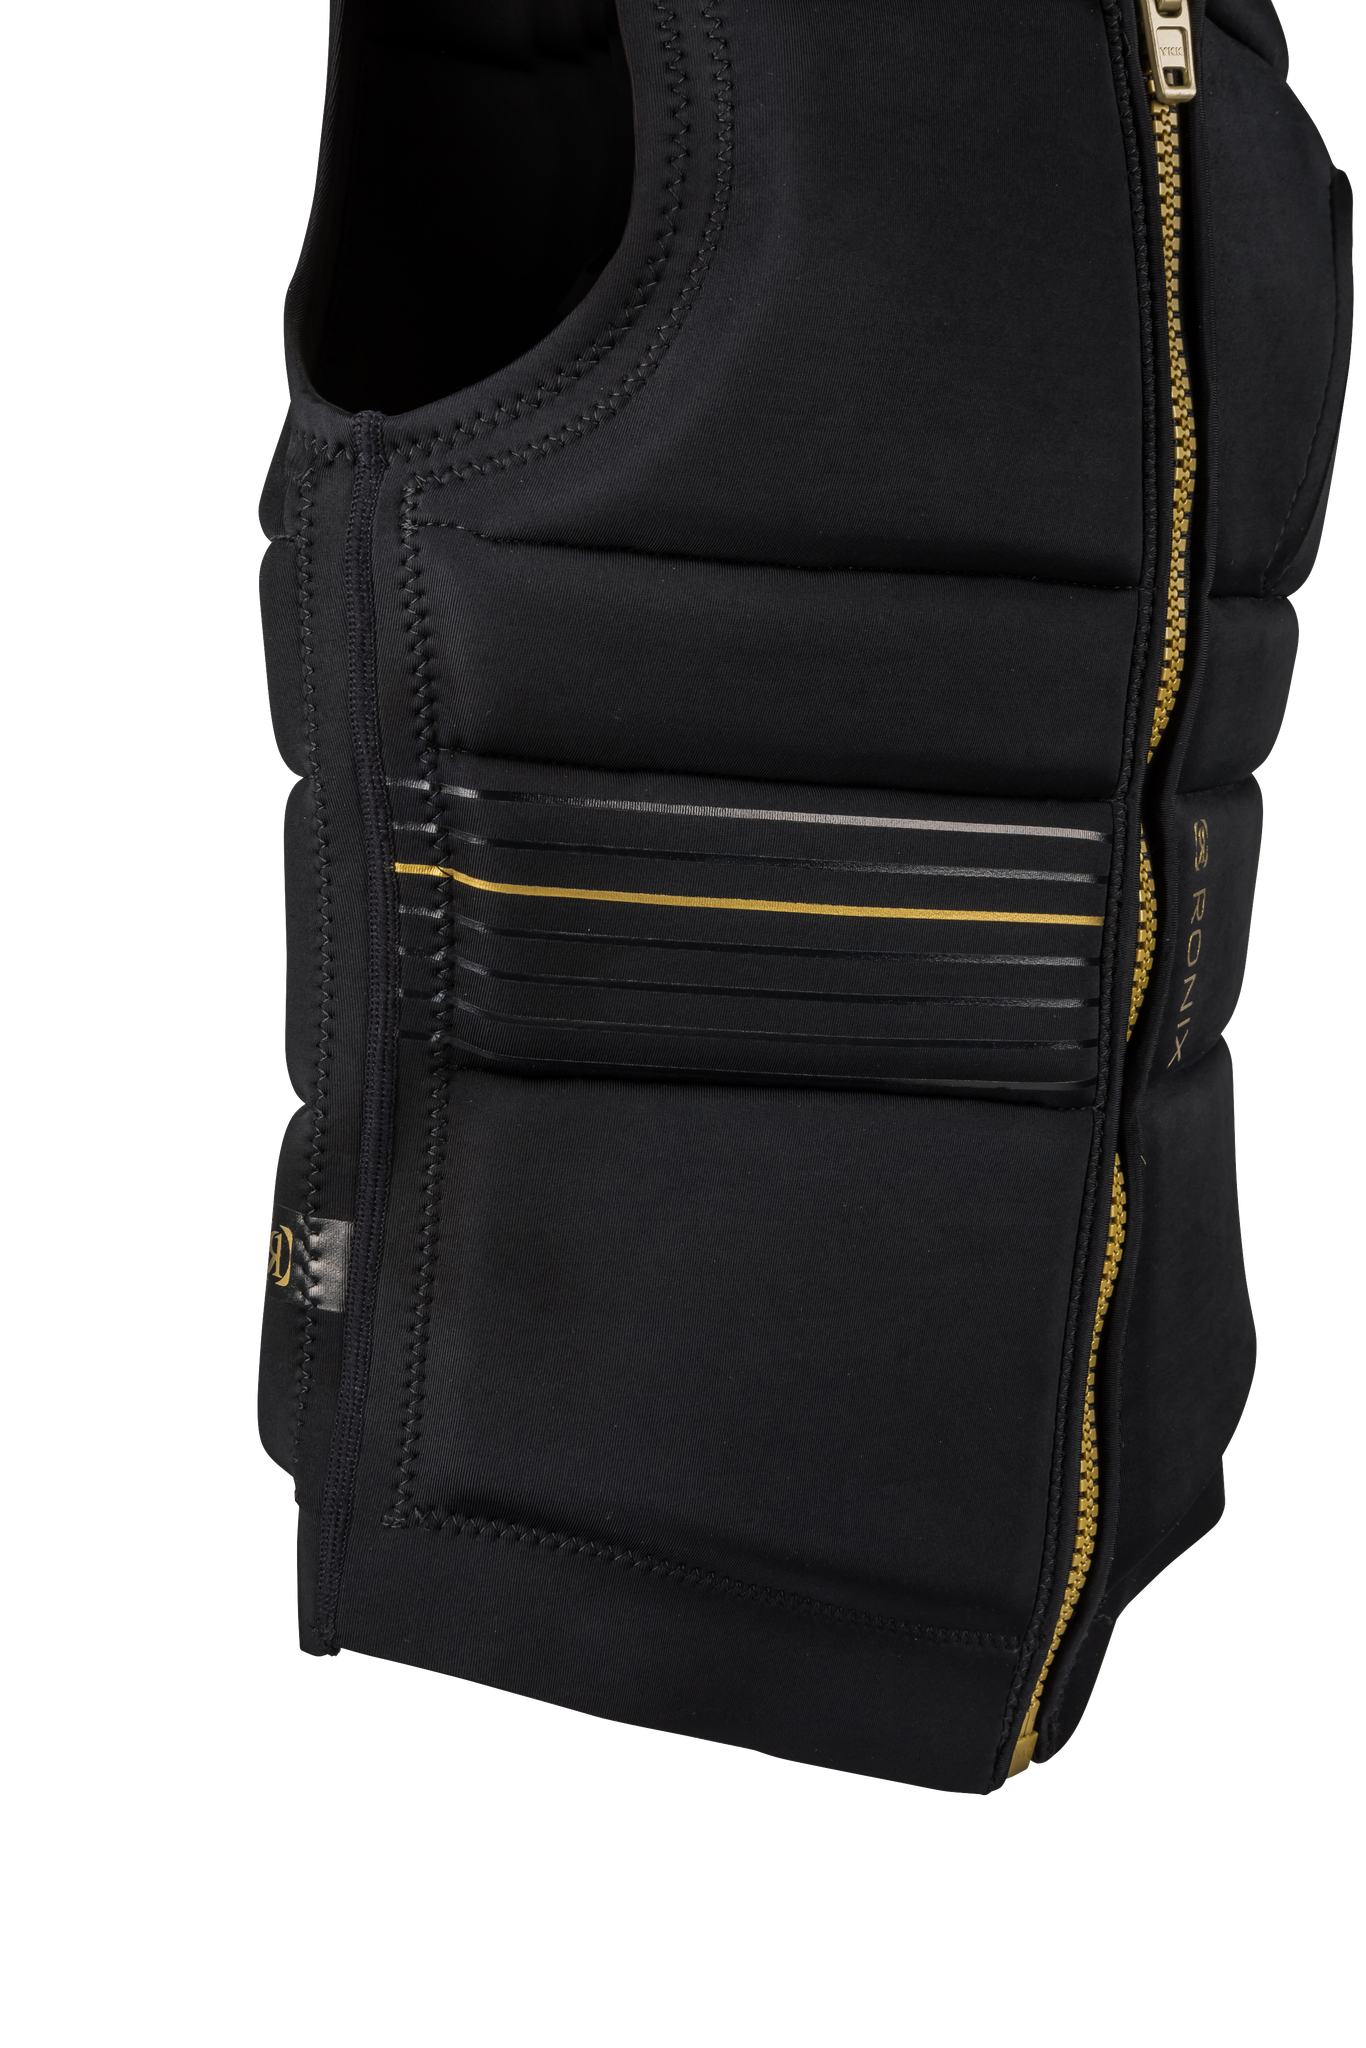 A Ronix 2024 Rise Women's CE Impact Vest equipped with gold zippers.